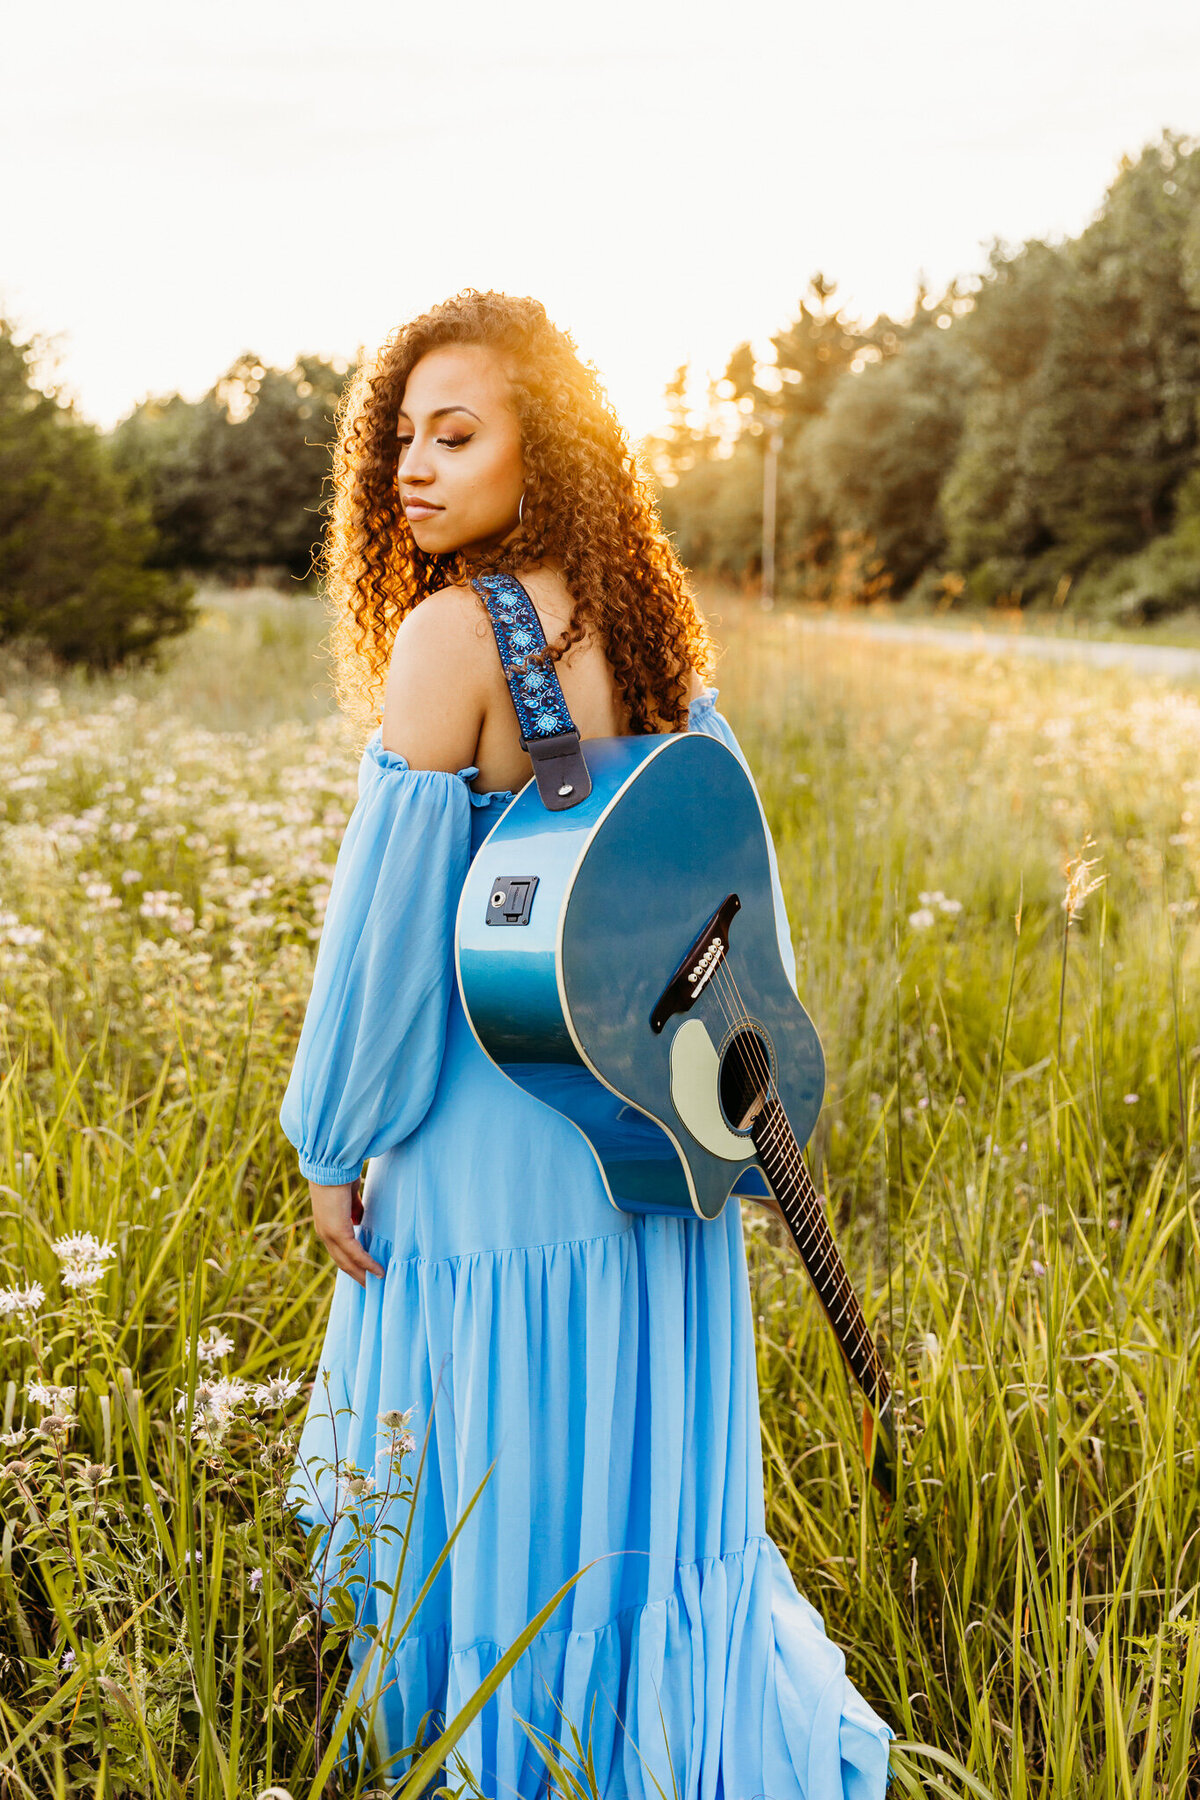 girl in blue dress with her guitar strapped to her back looking down at her shoulder